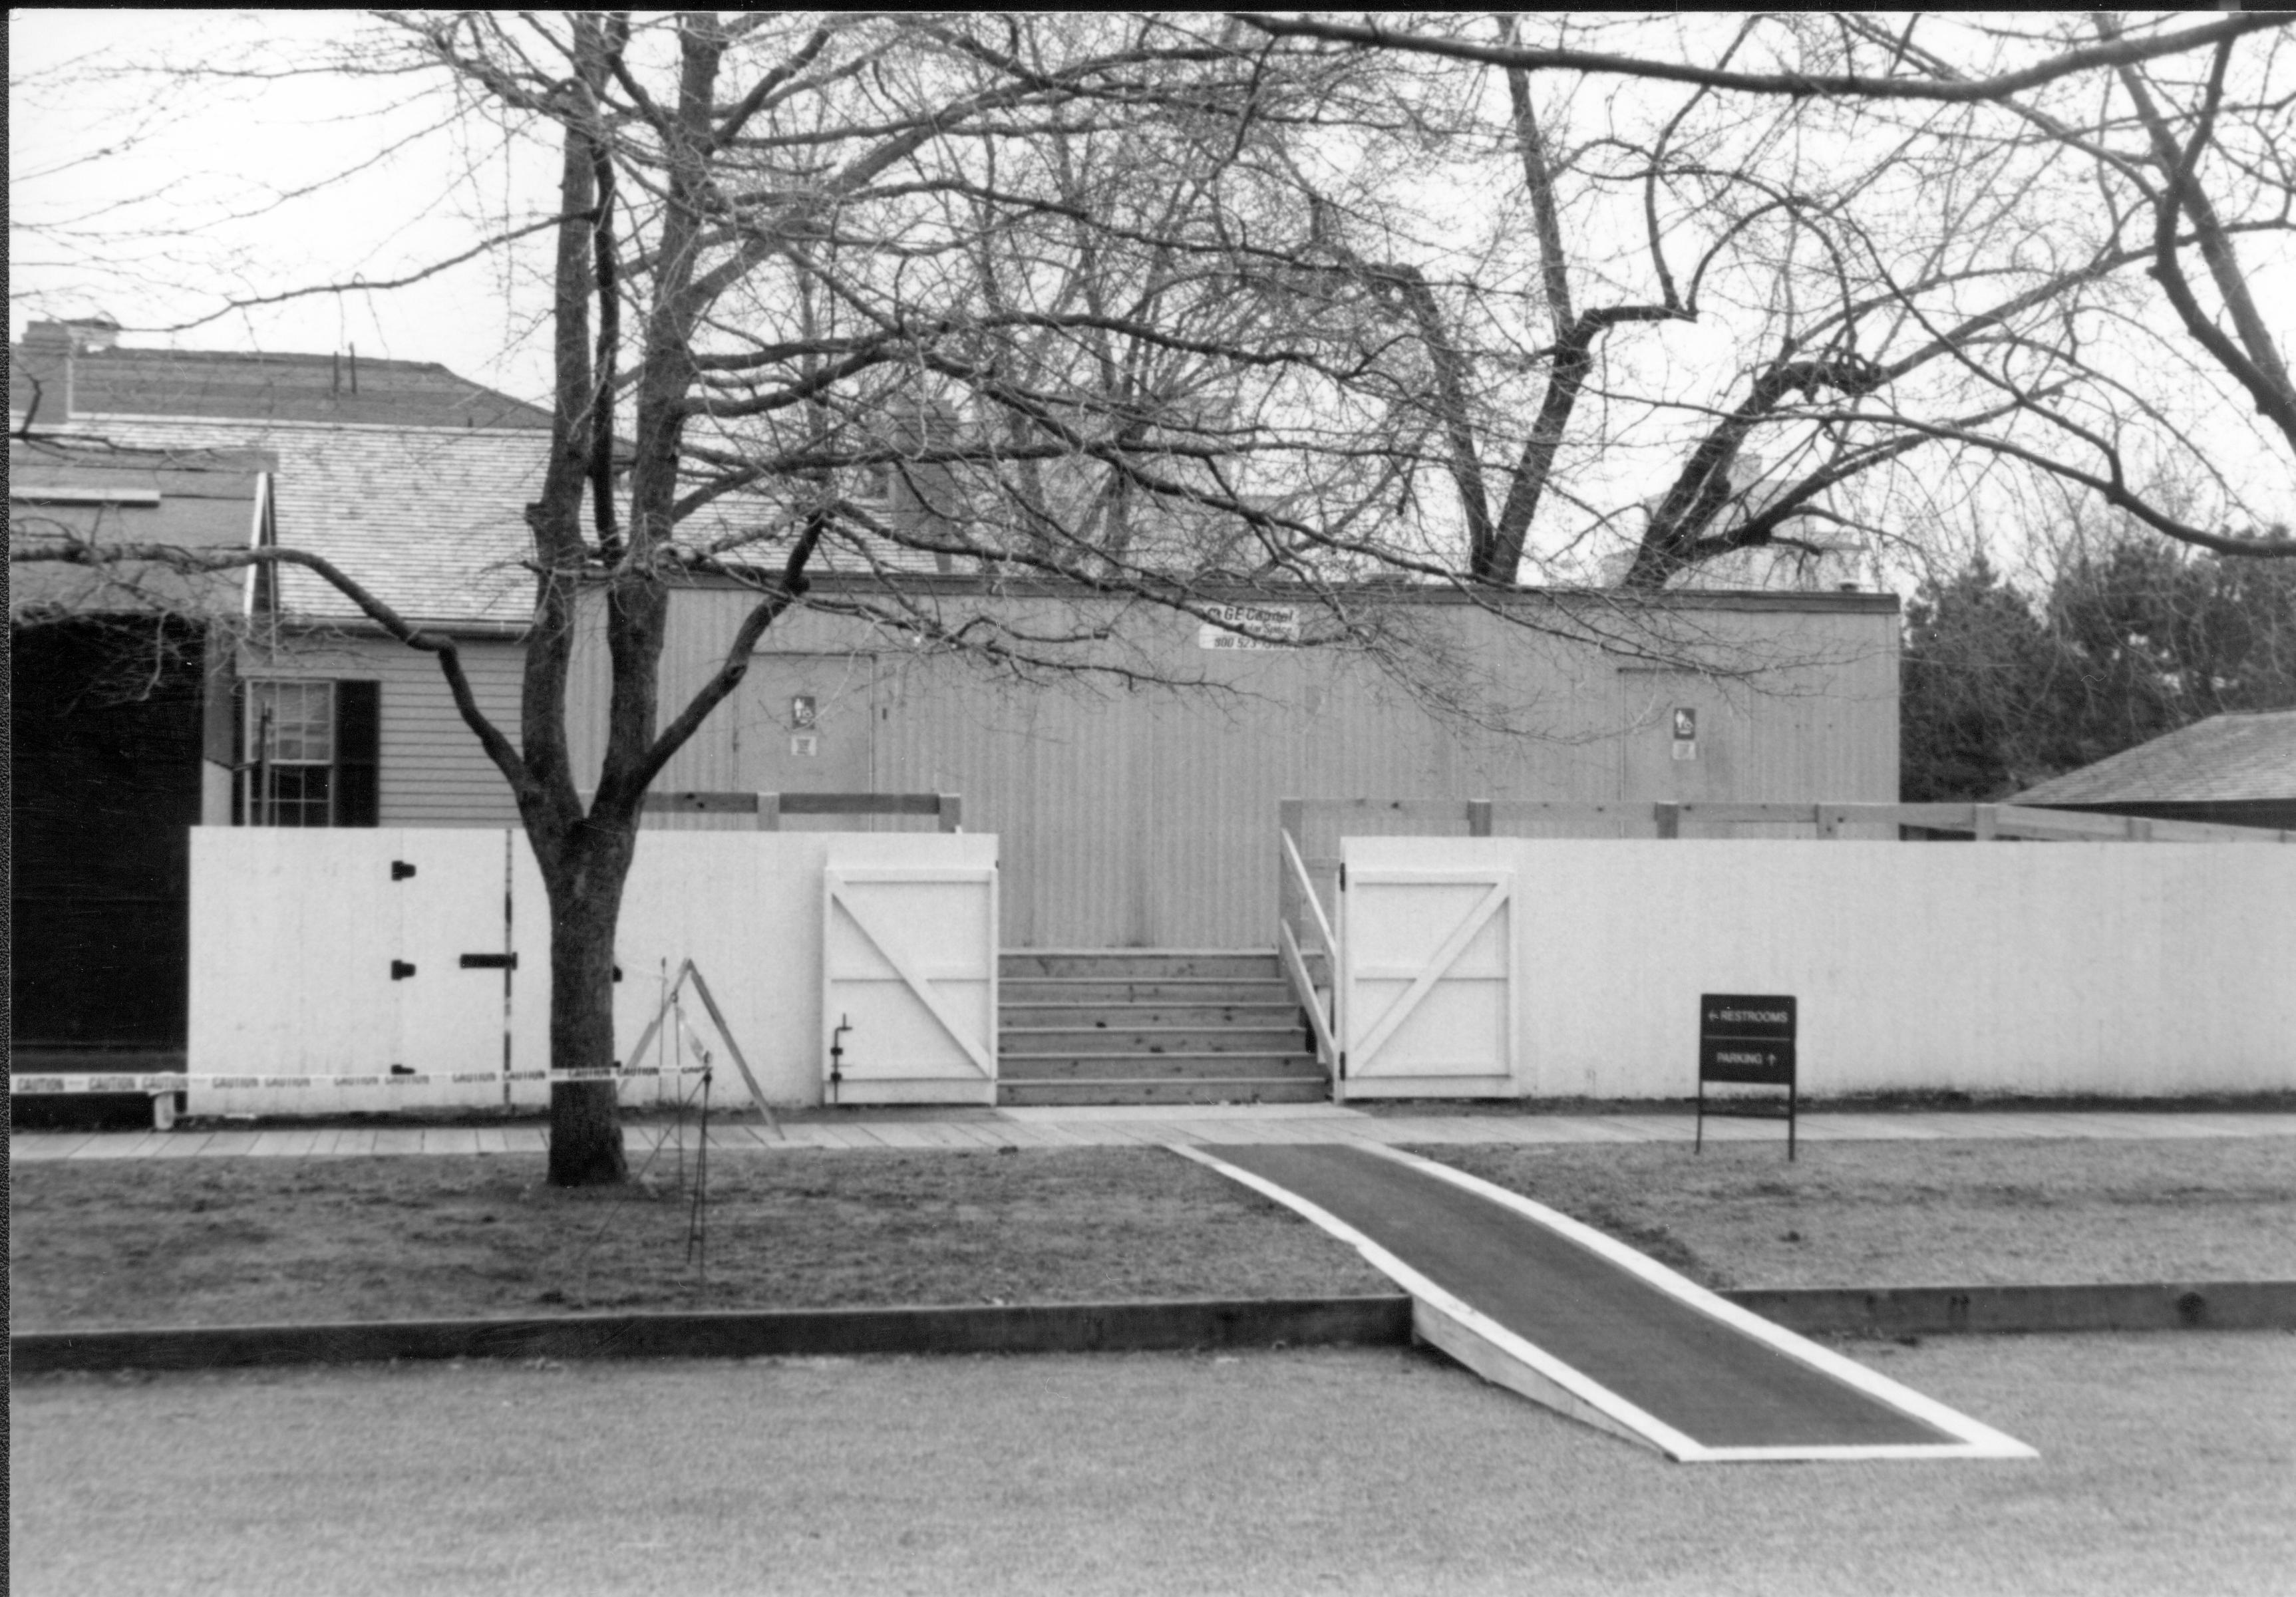 Temporary restroom trailer in use while Visitor Center was remodeled. Located in the Corneau lot (Block 6, Lot 16). Wheelchair access ramp goes off decking to right, steps come down front to another access ramp into Jackson Street. Corneau House (under restoration) on far left. Sprigg House in background left. Maintenance shed on background far right. Looking South from boardwalk on North side of Jackson Street. Visitor Center, Corneau, restroom, trailer, Jackson Street, shed